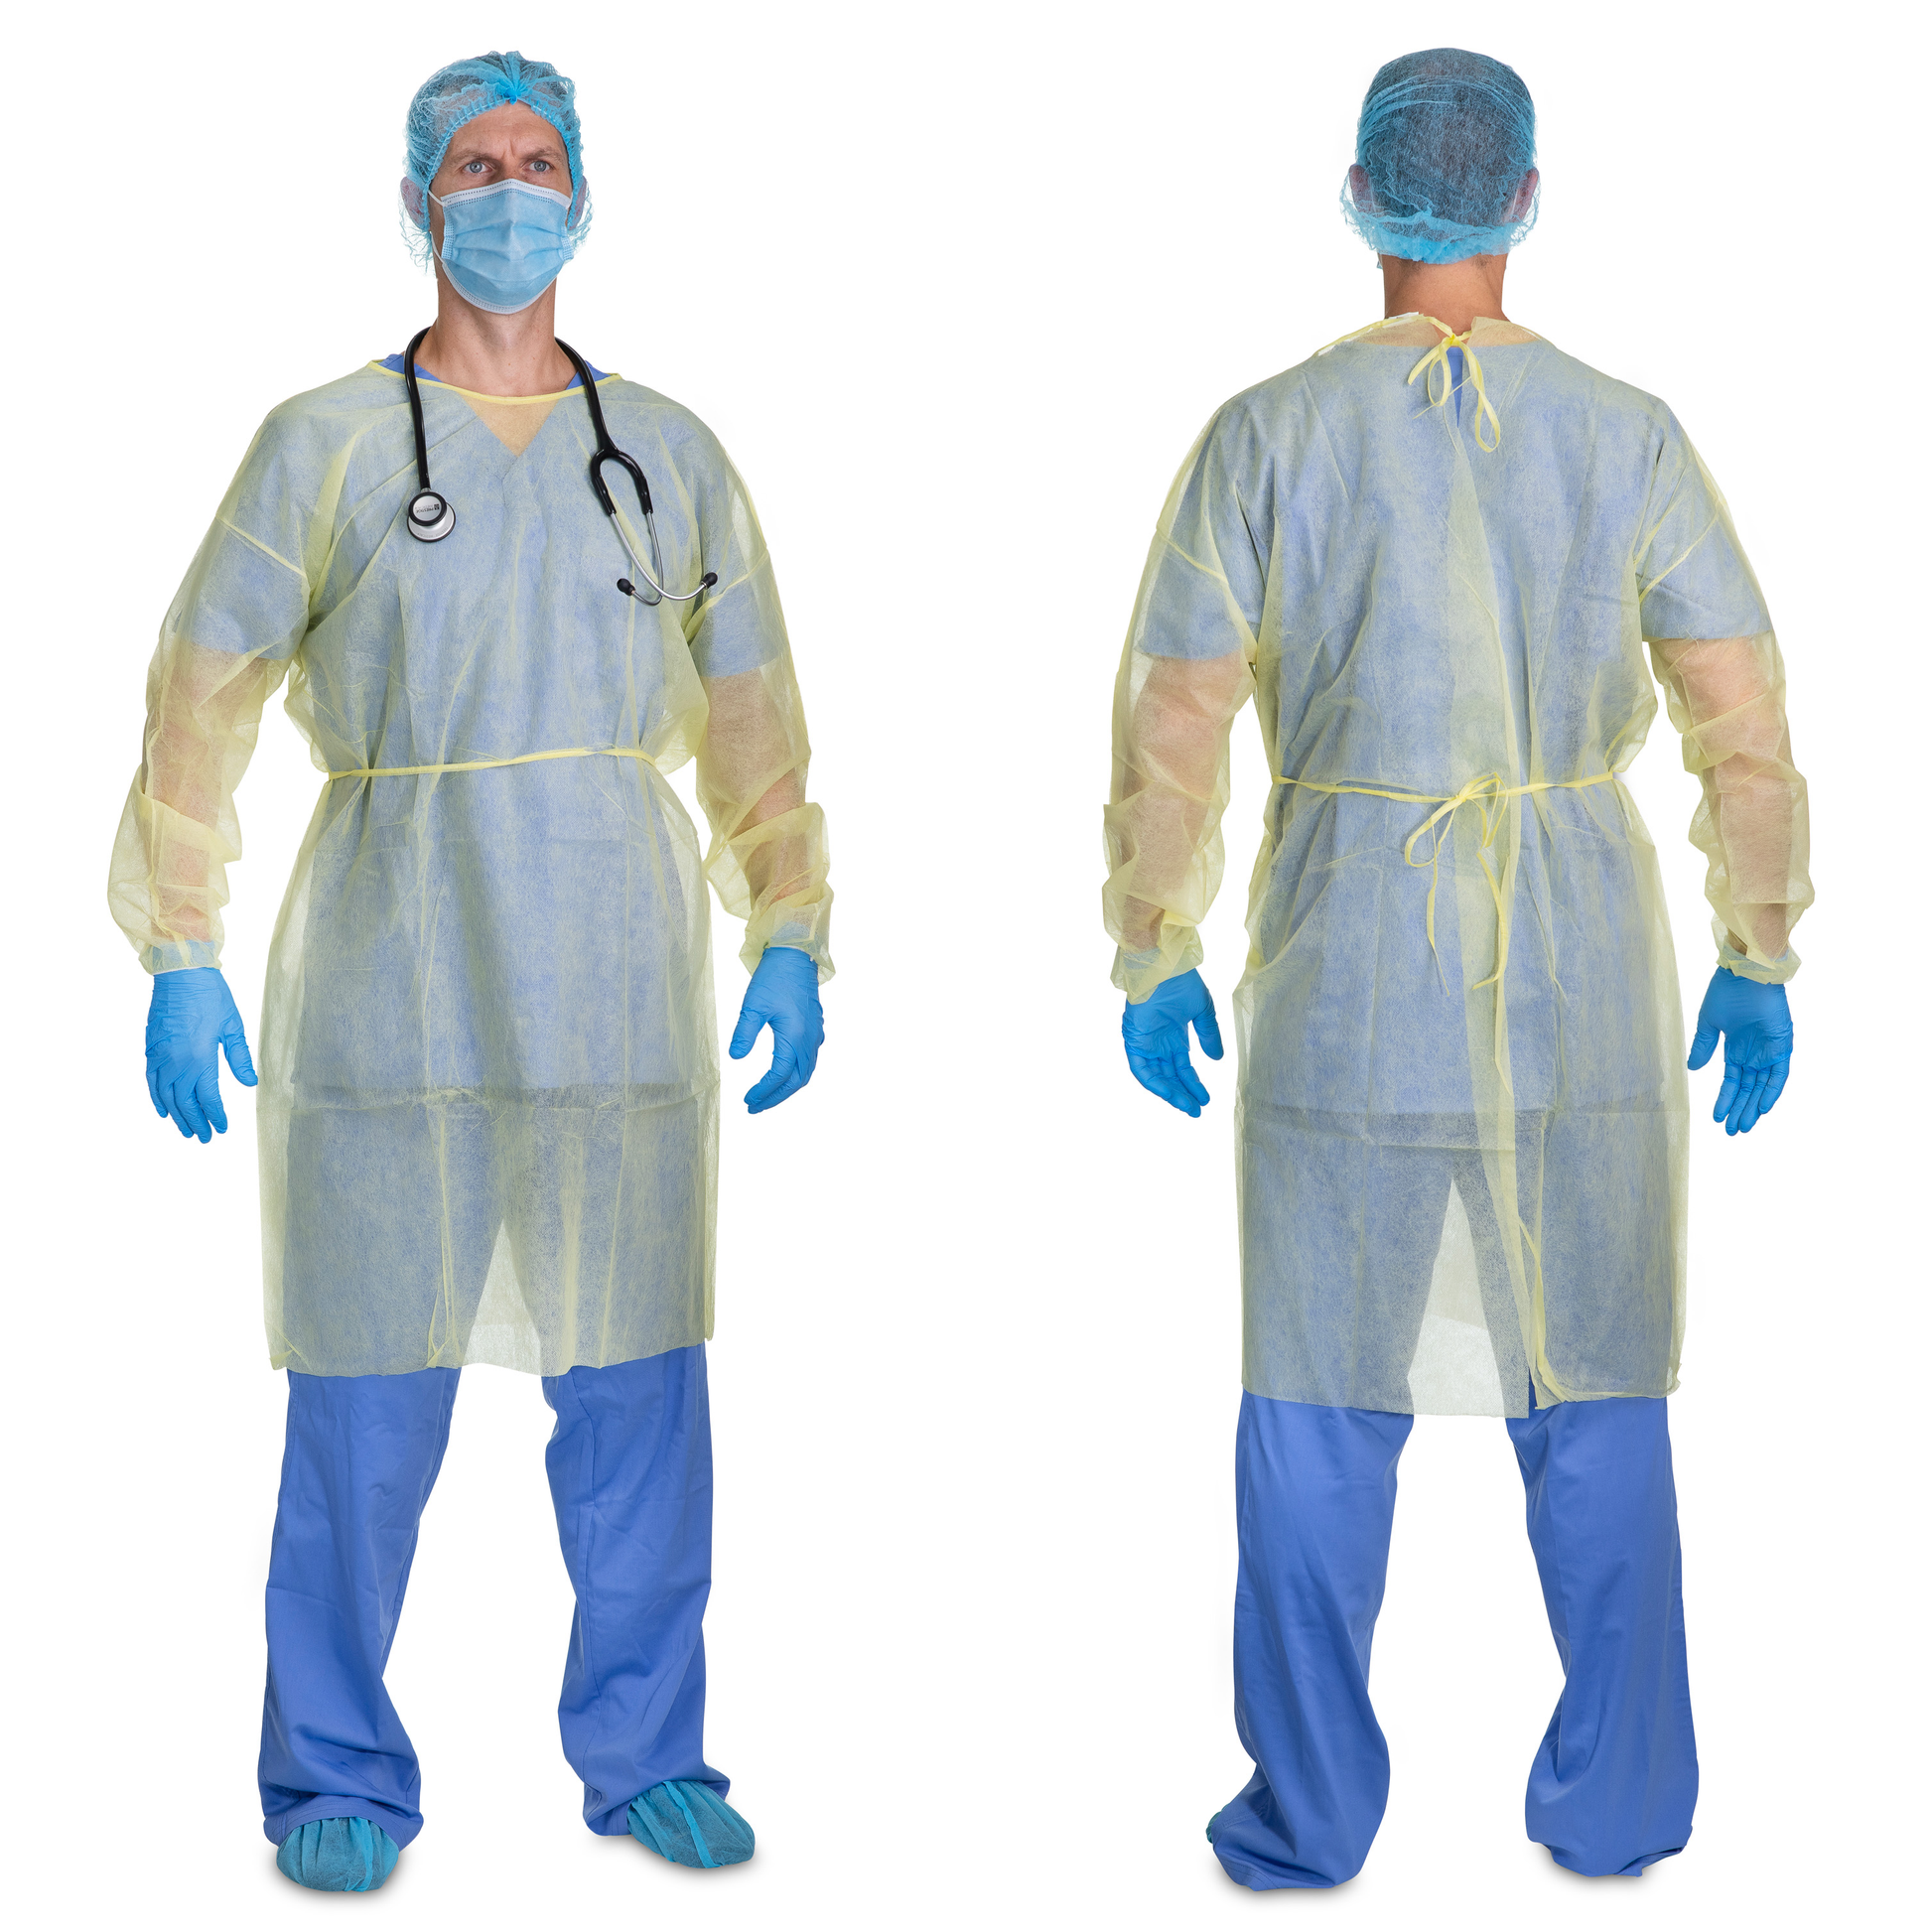 Isolation Gown With Elastic Cuff, Latex-Free,  Fluid Resistant, Polypropylene, Dental, Medical, Hospital